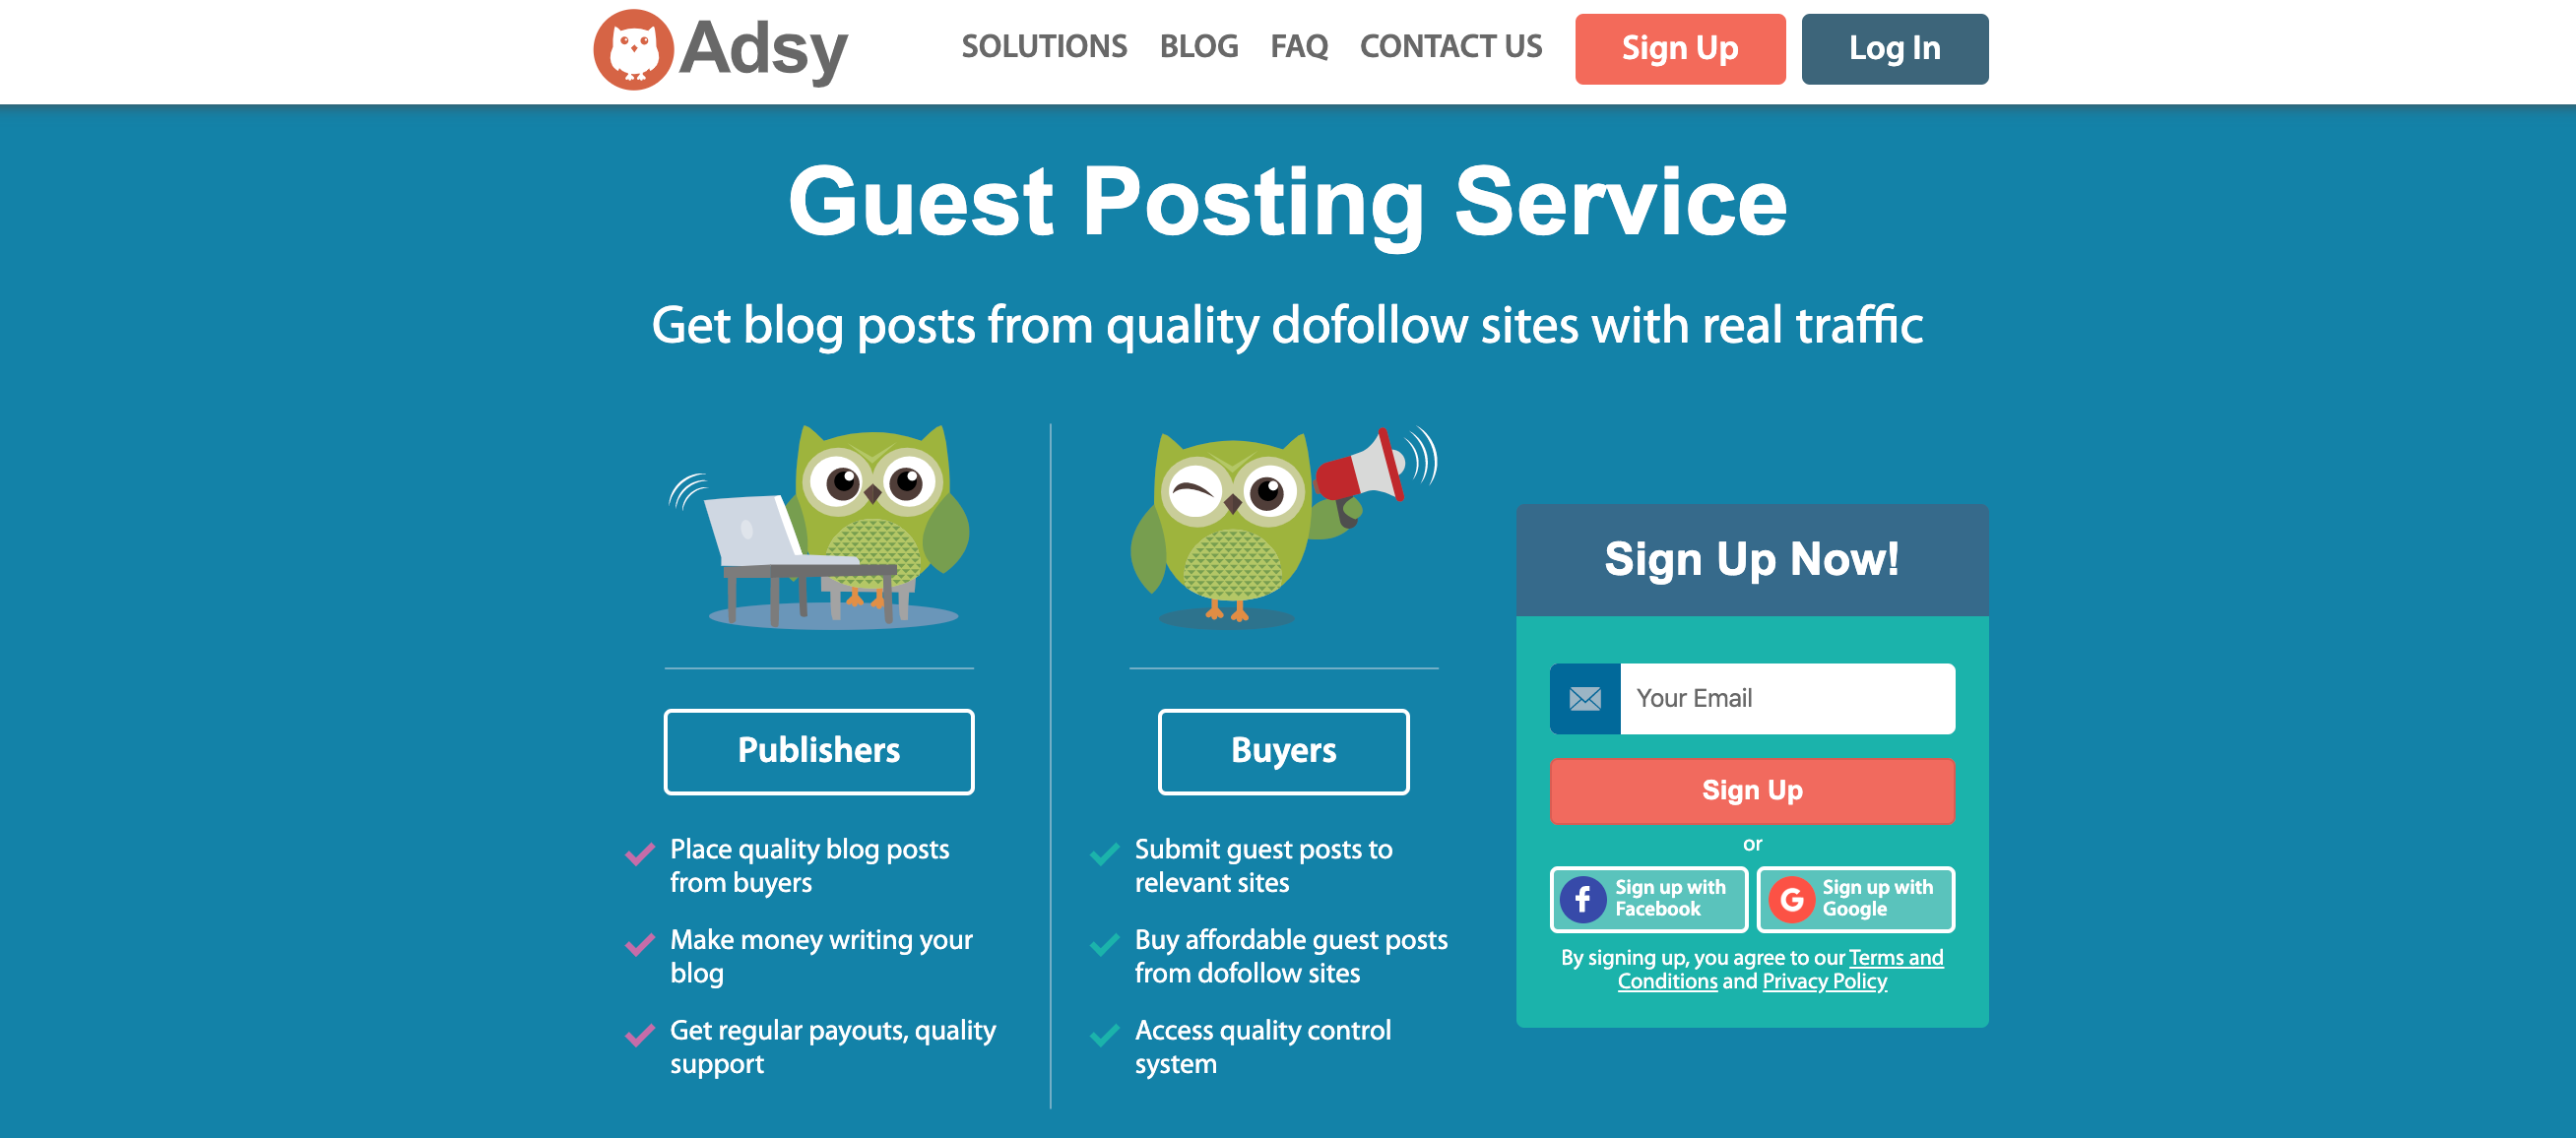 Adsy Review- Guest Posting Services